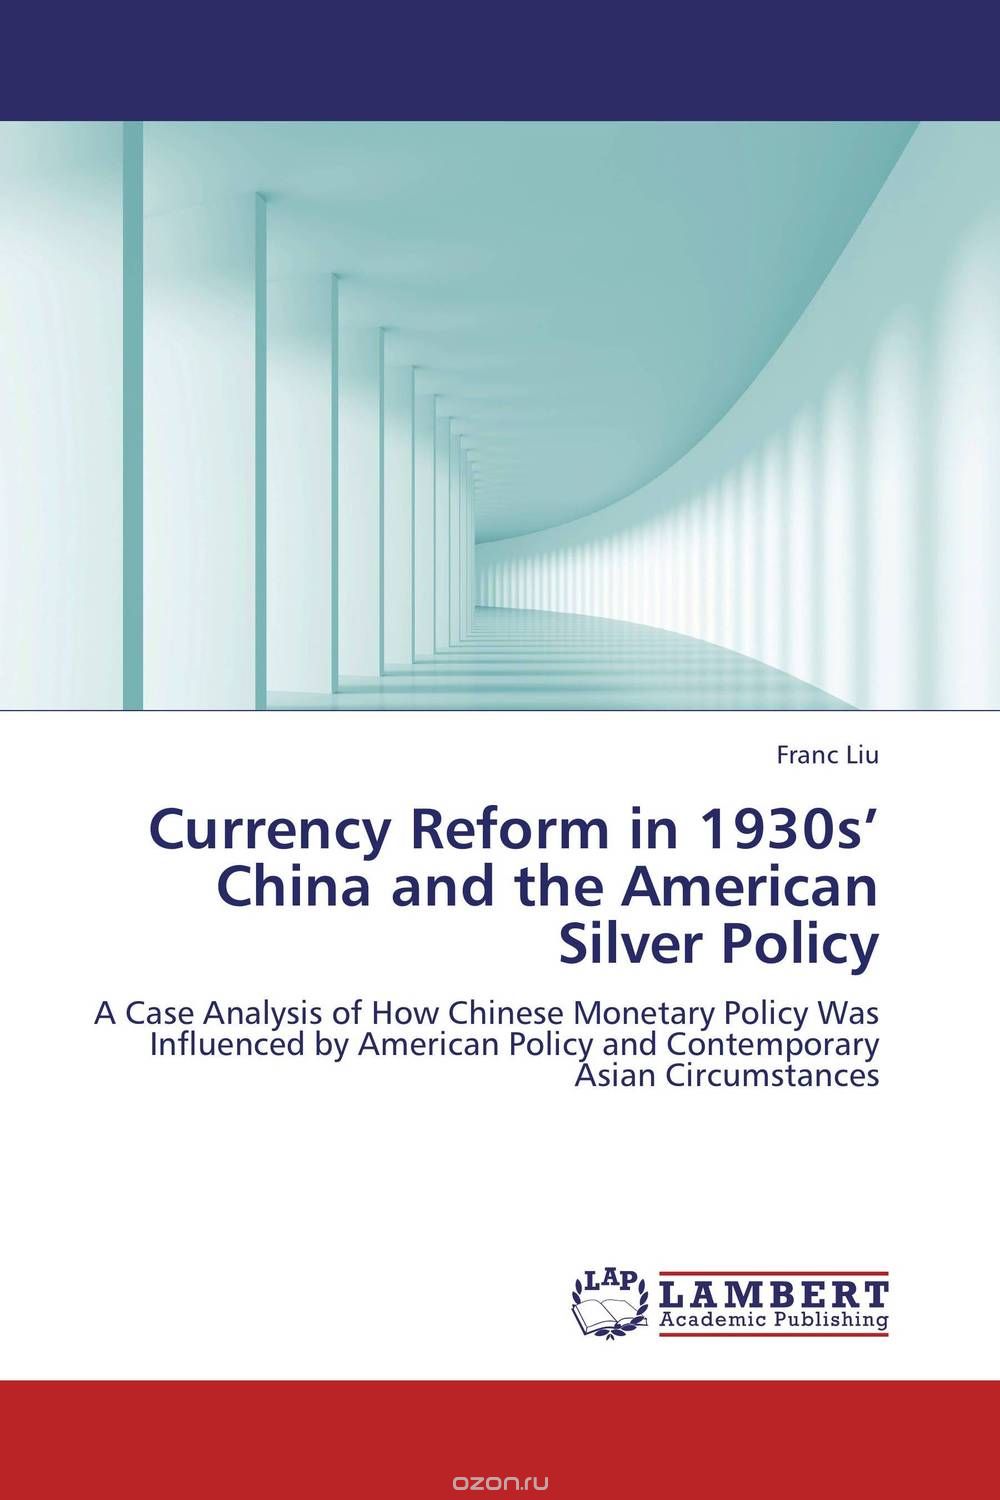 Скачать книгу "Currency Reform in 1930s’ China and the American Silver Policy"